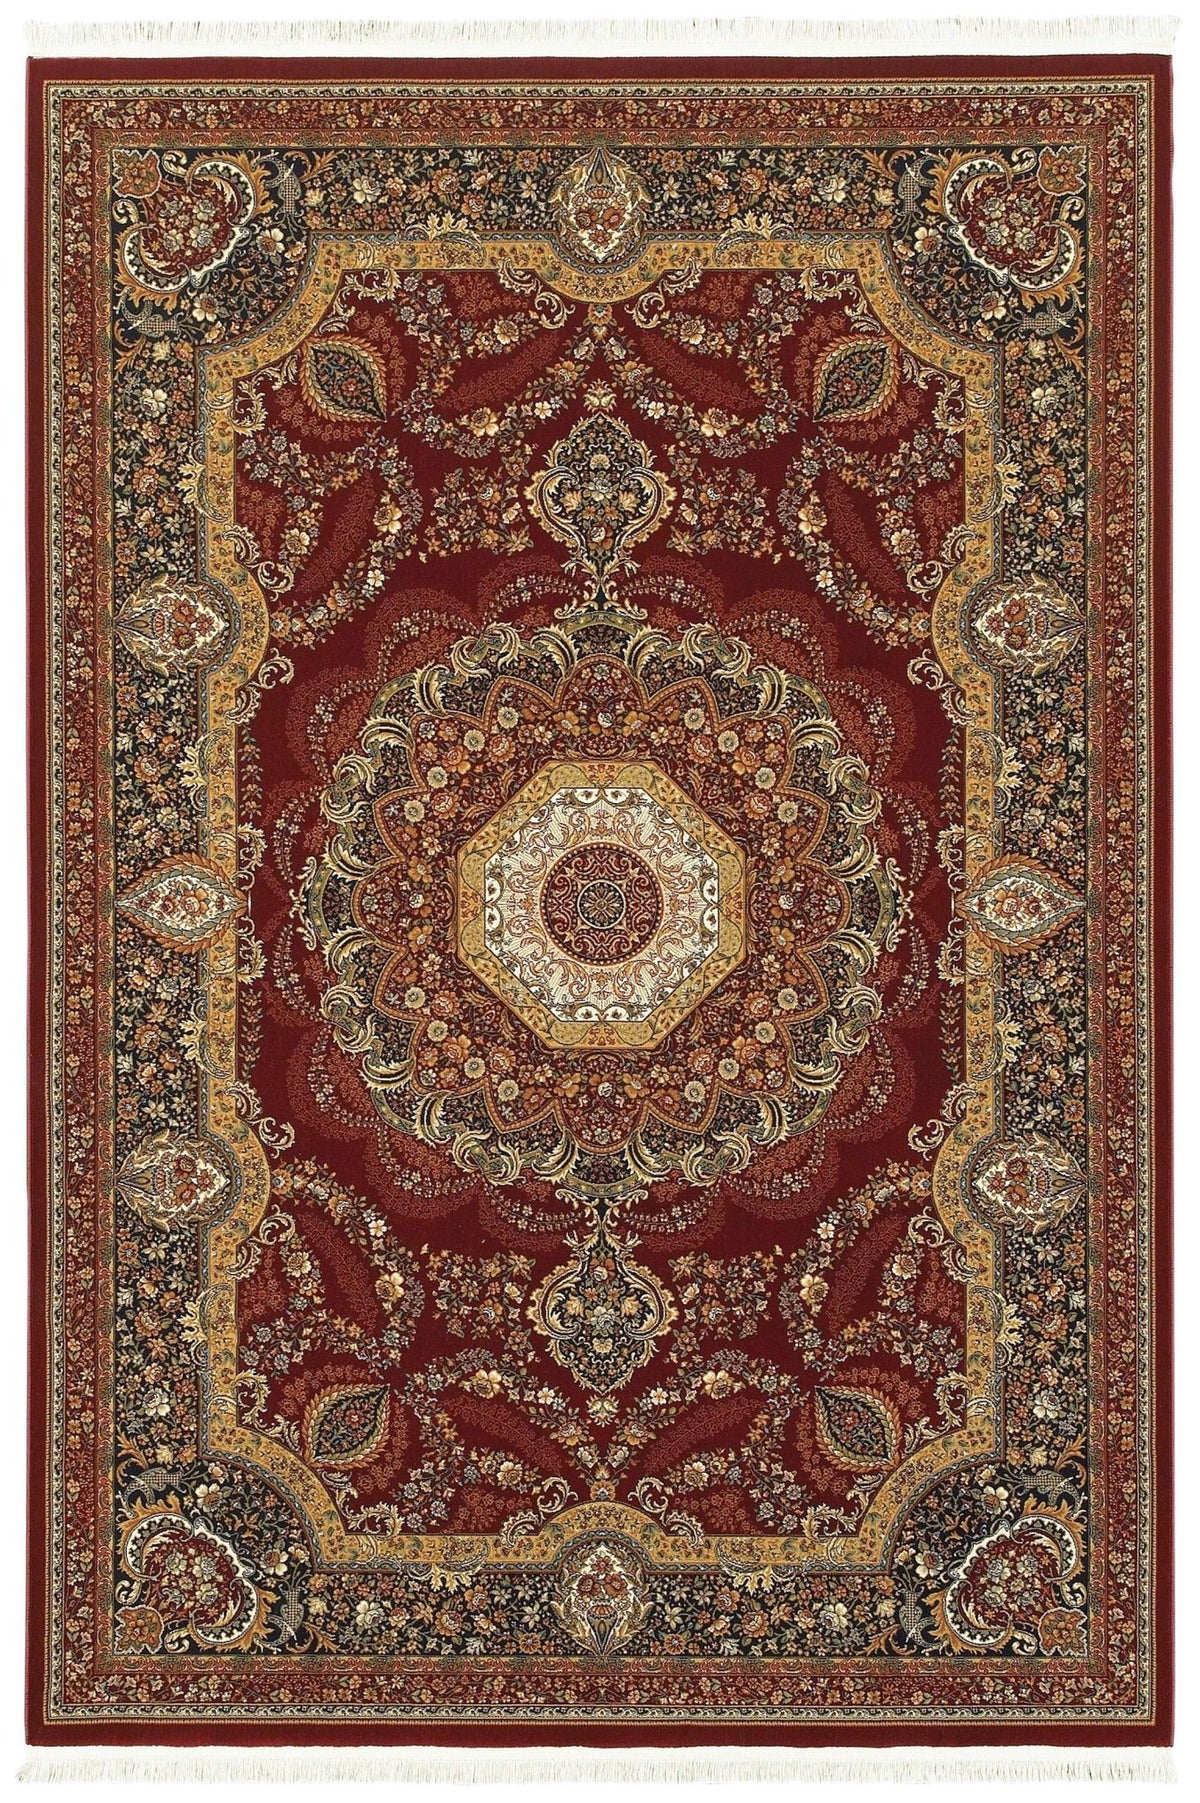 Masterpiece 113R Red/ Multi Rug - Rug & Home